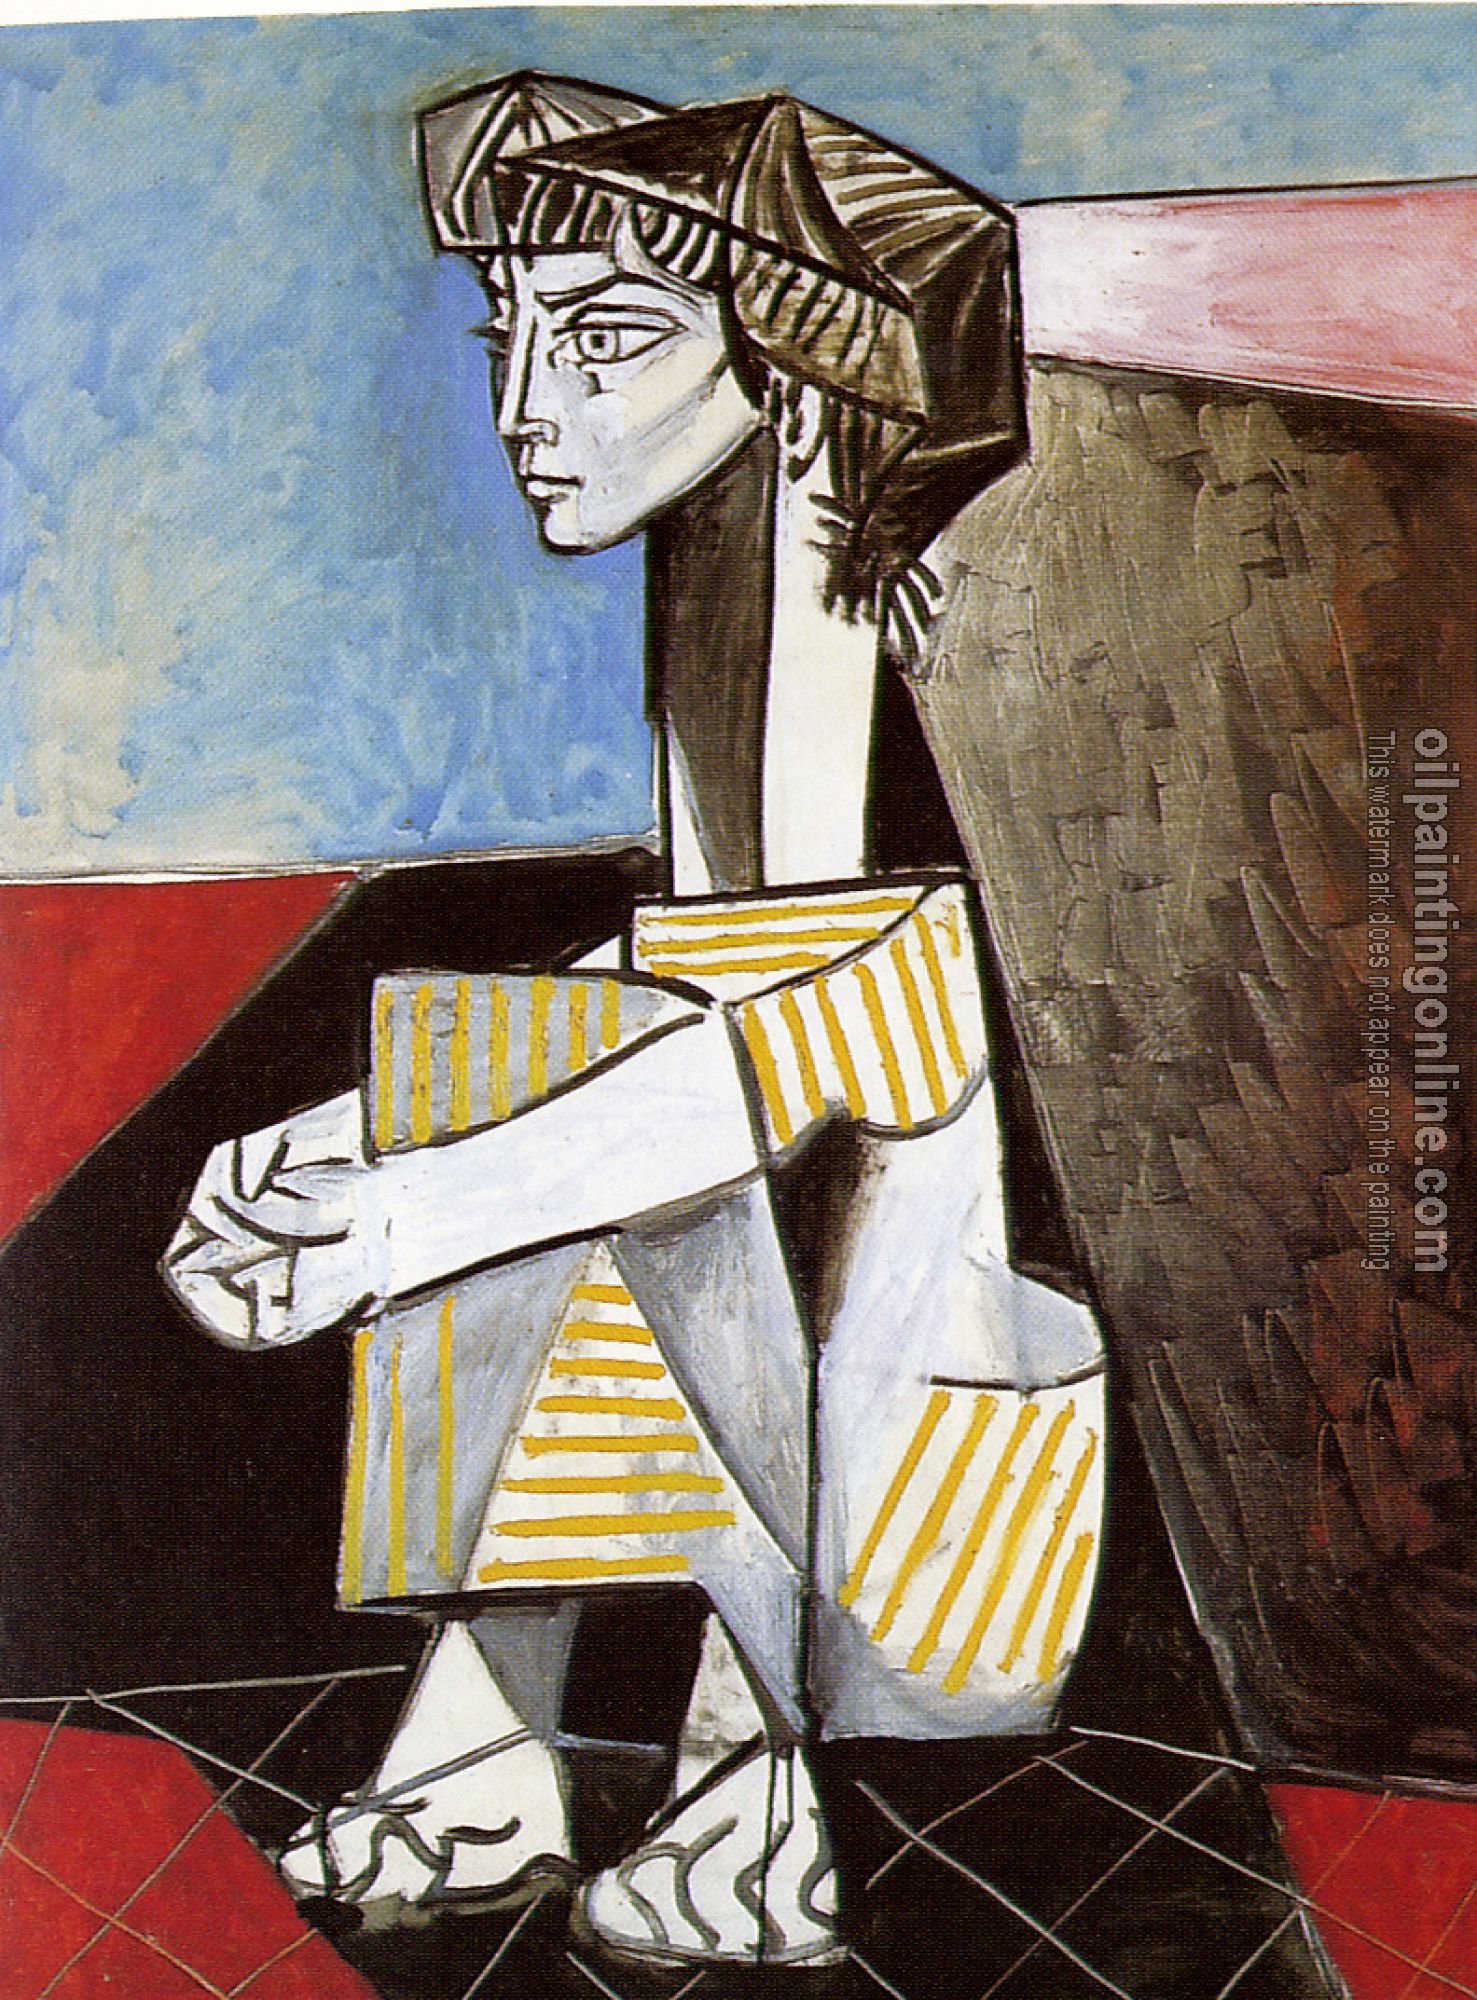 Picasso, Pablo - jacqueline with crossed hands